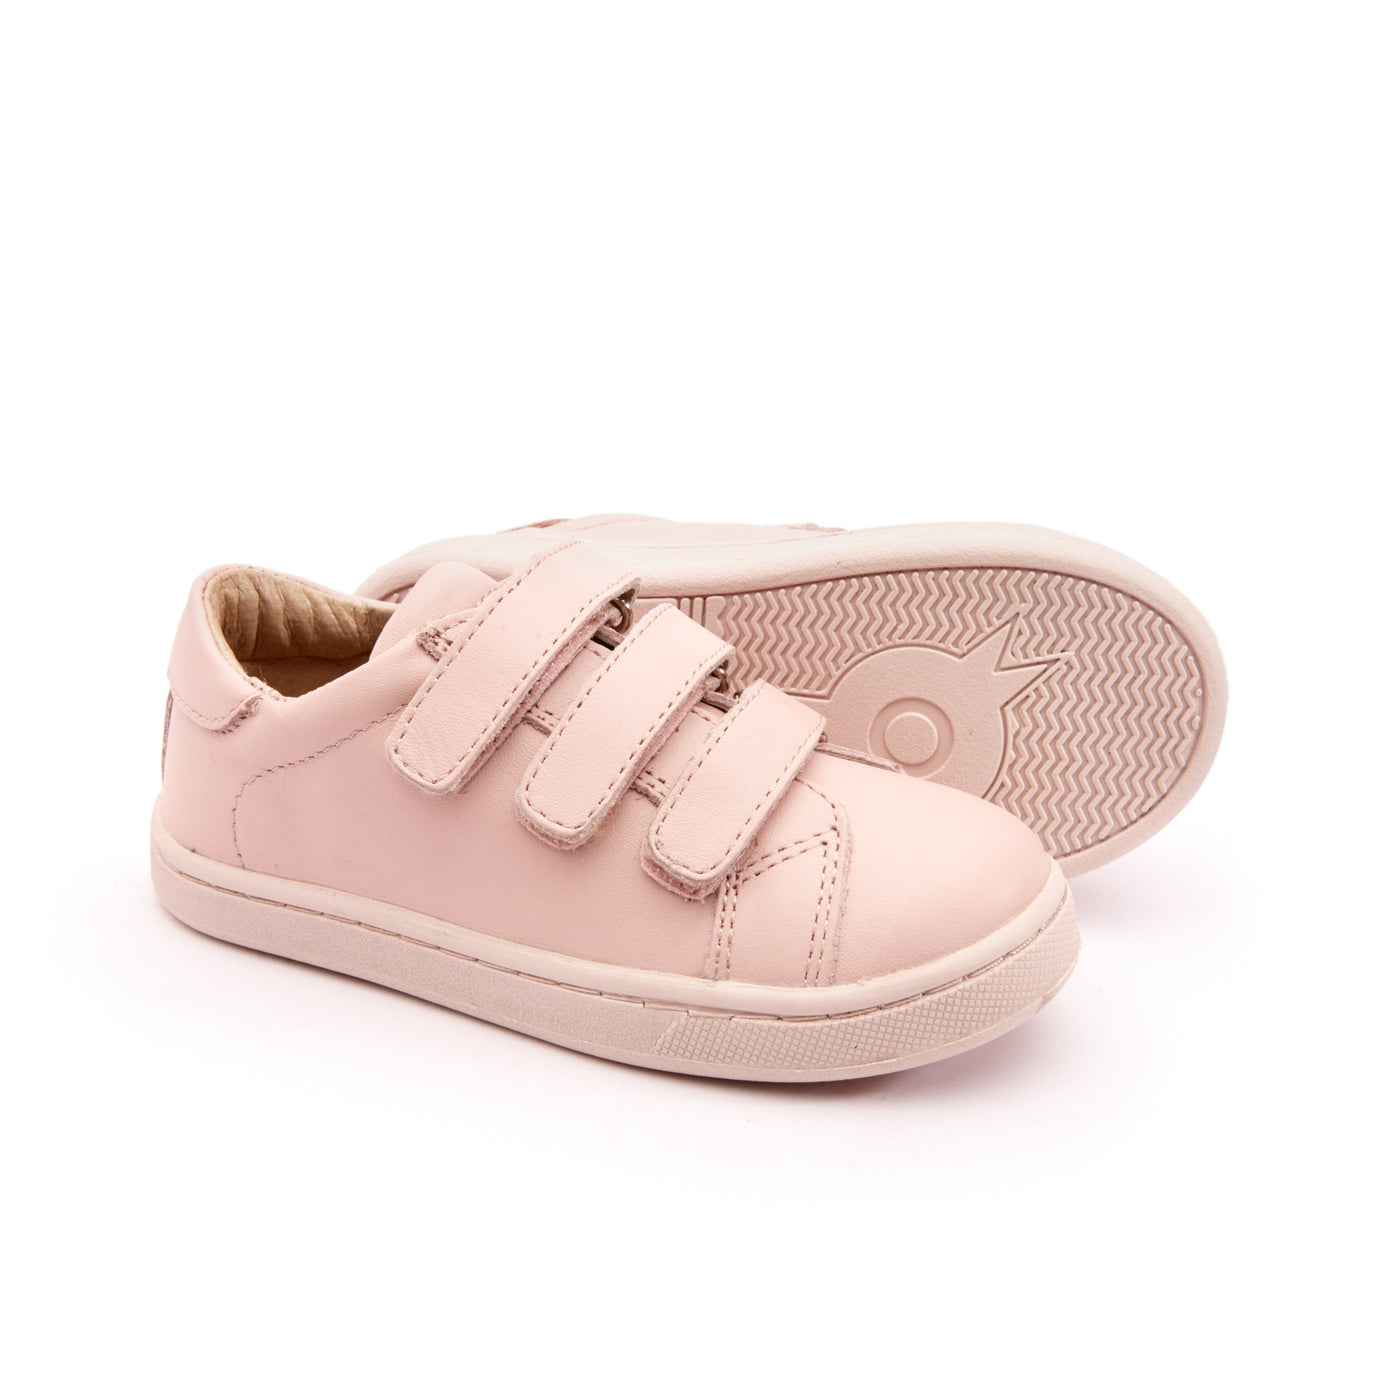 OLD SOLES Kids Girl Boy Step Markert Leather Sneakers in Powder Pink / Pink Sole